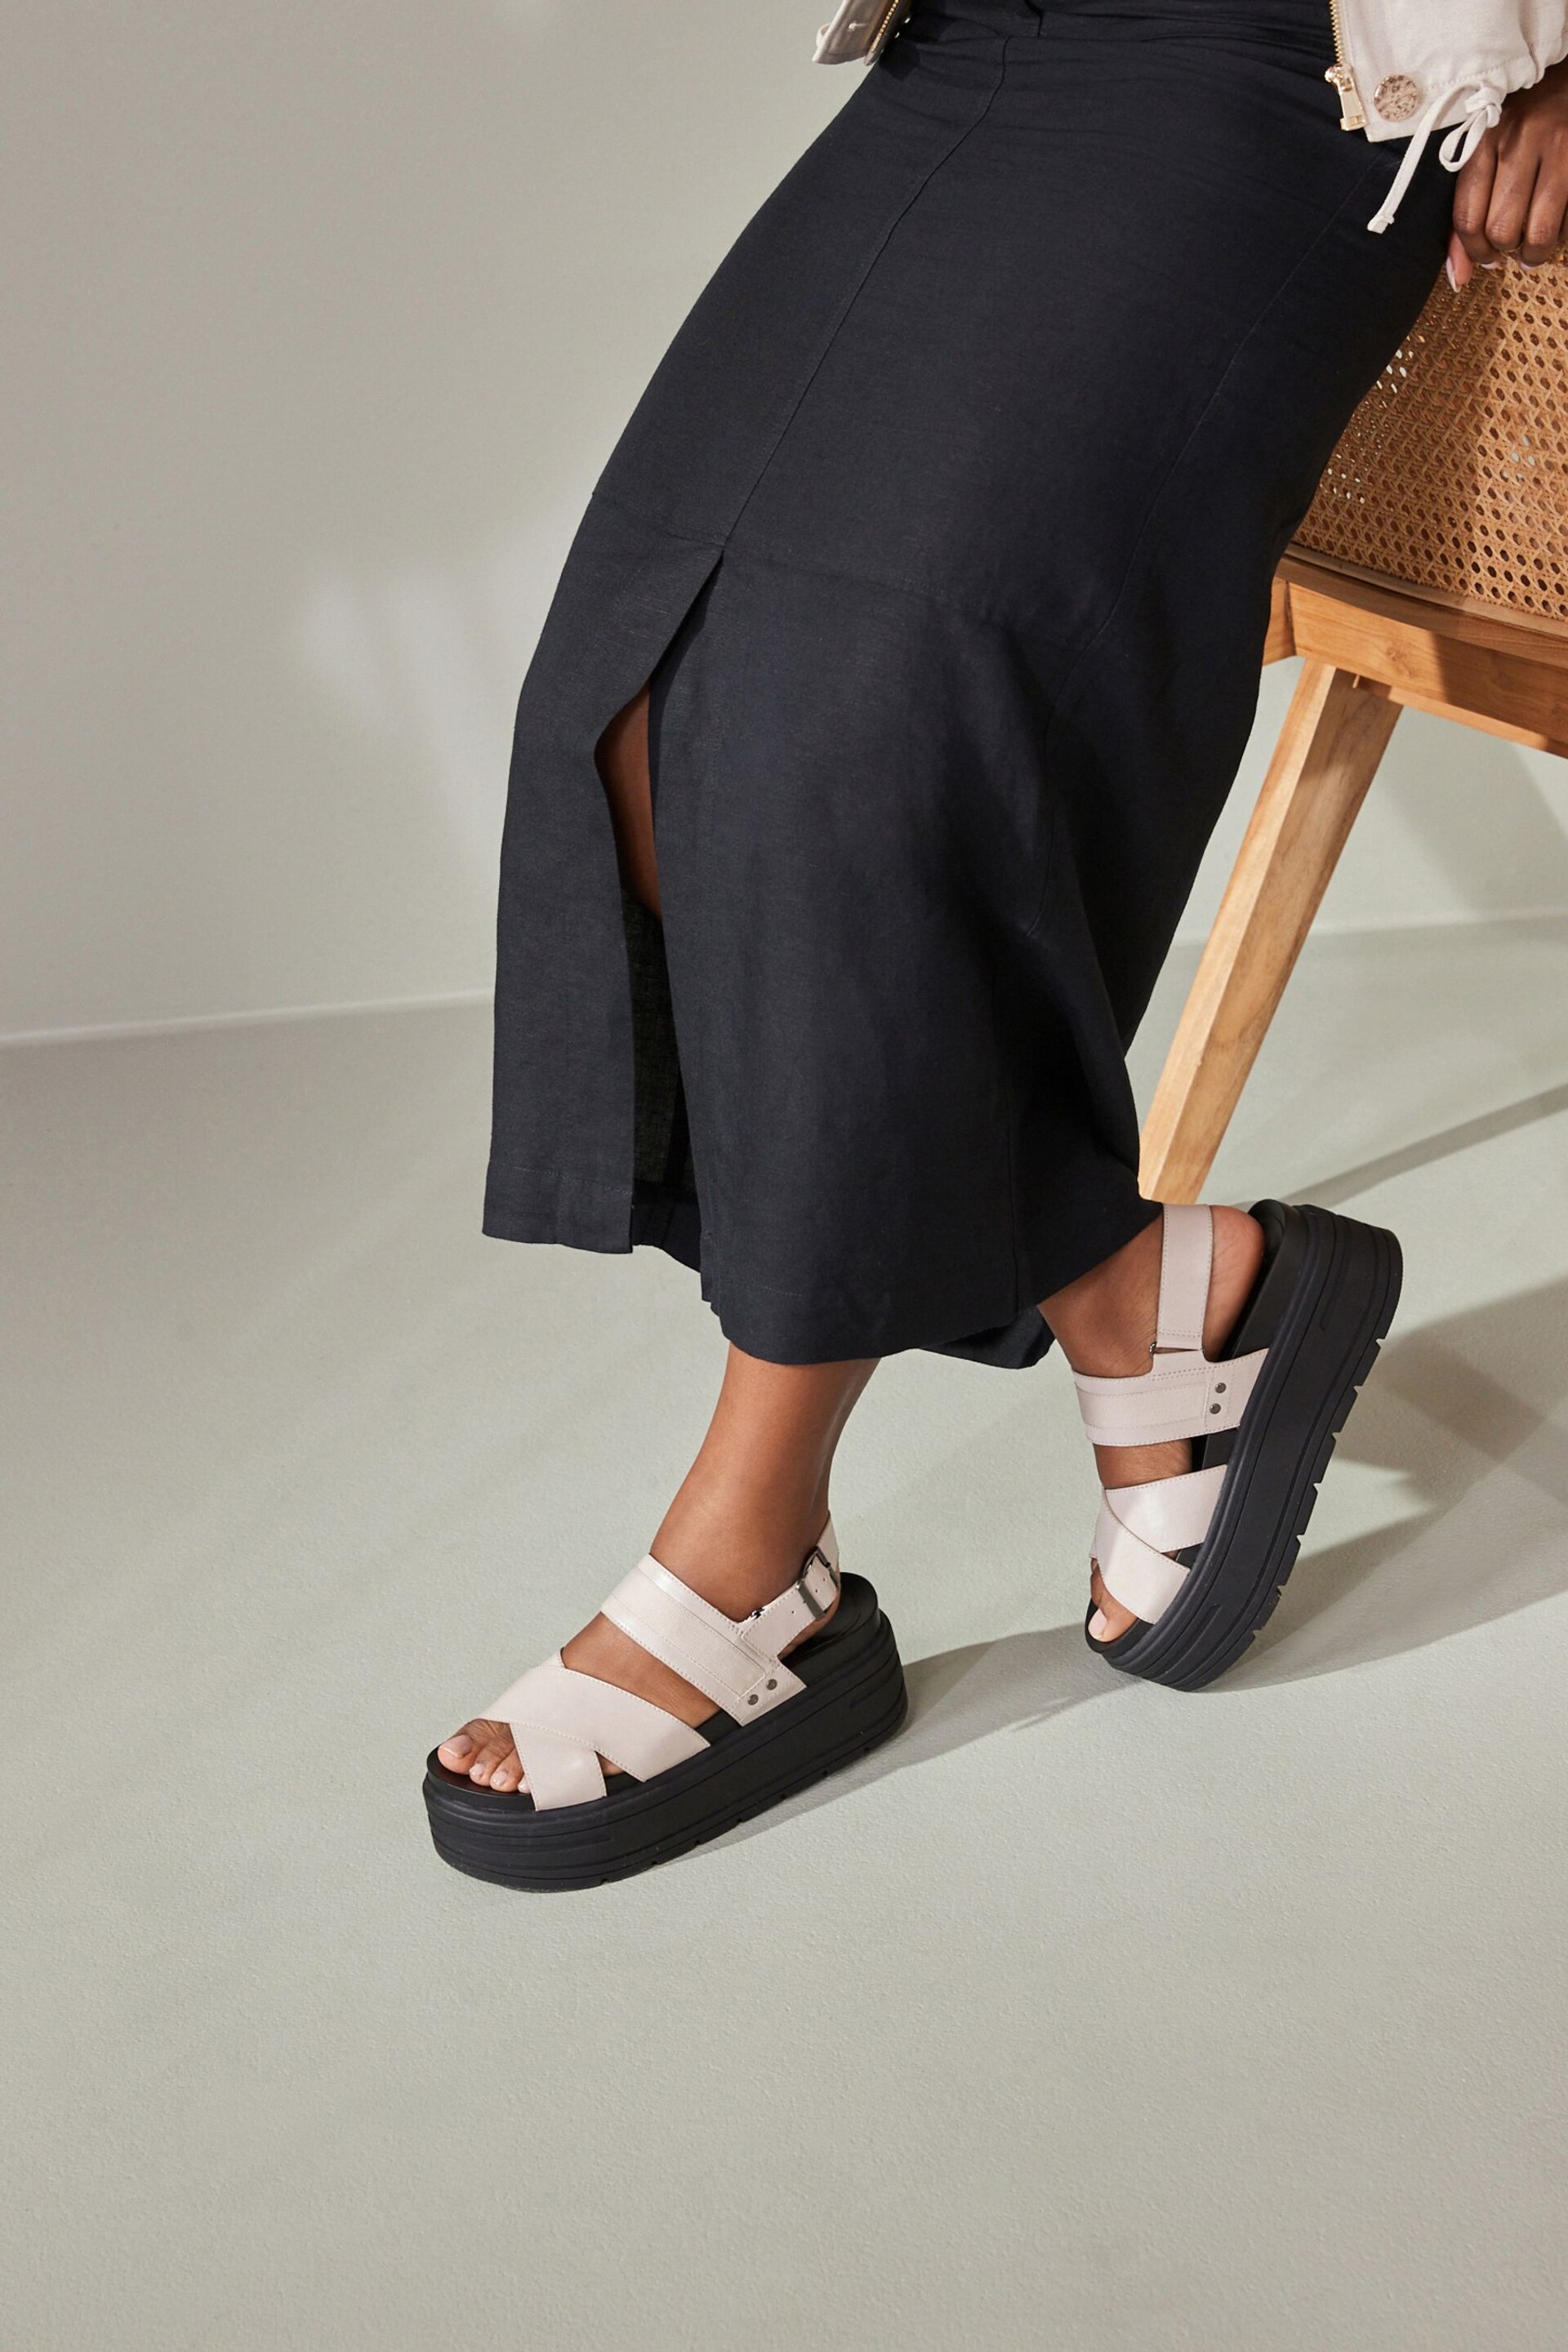 Bone Regular/Wide Fit Chunky Wedge Sandals - Image 2 of 8